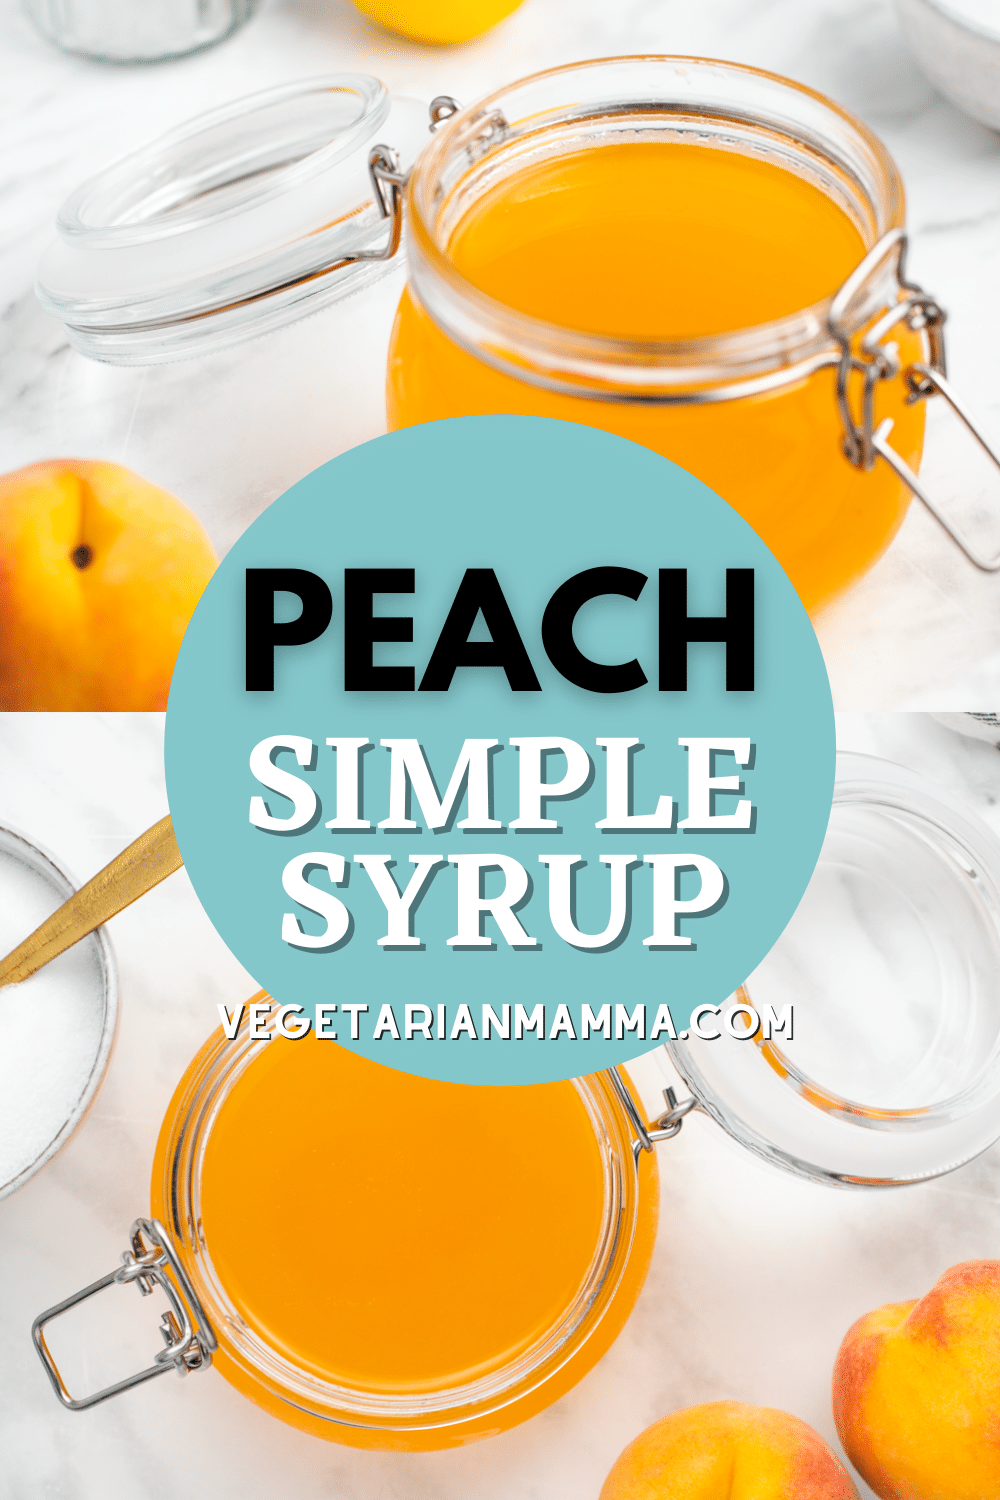 images of peach simple syrup with text title in a blue circle in the center